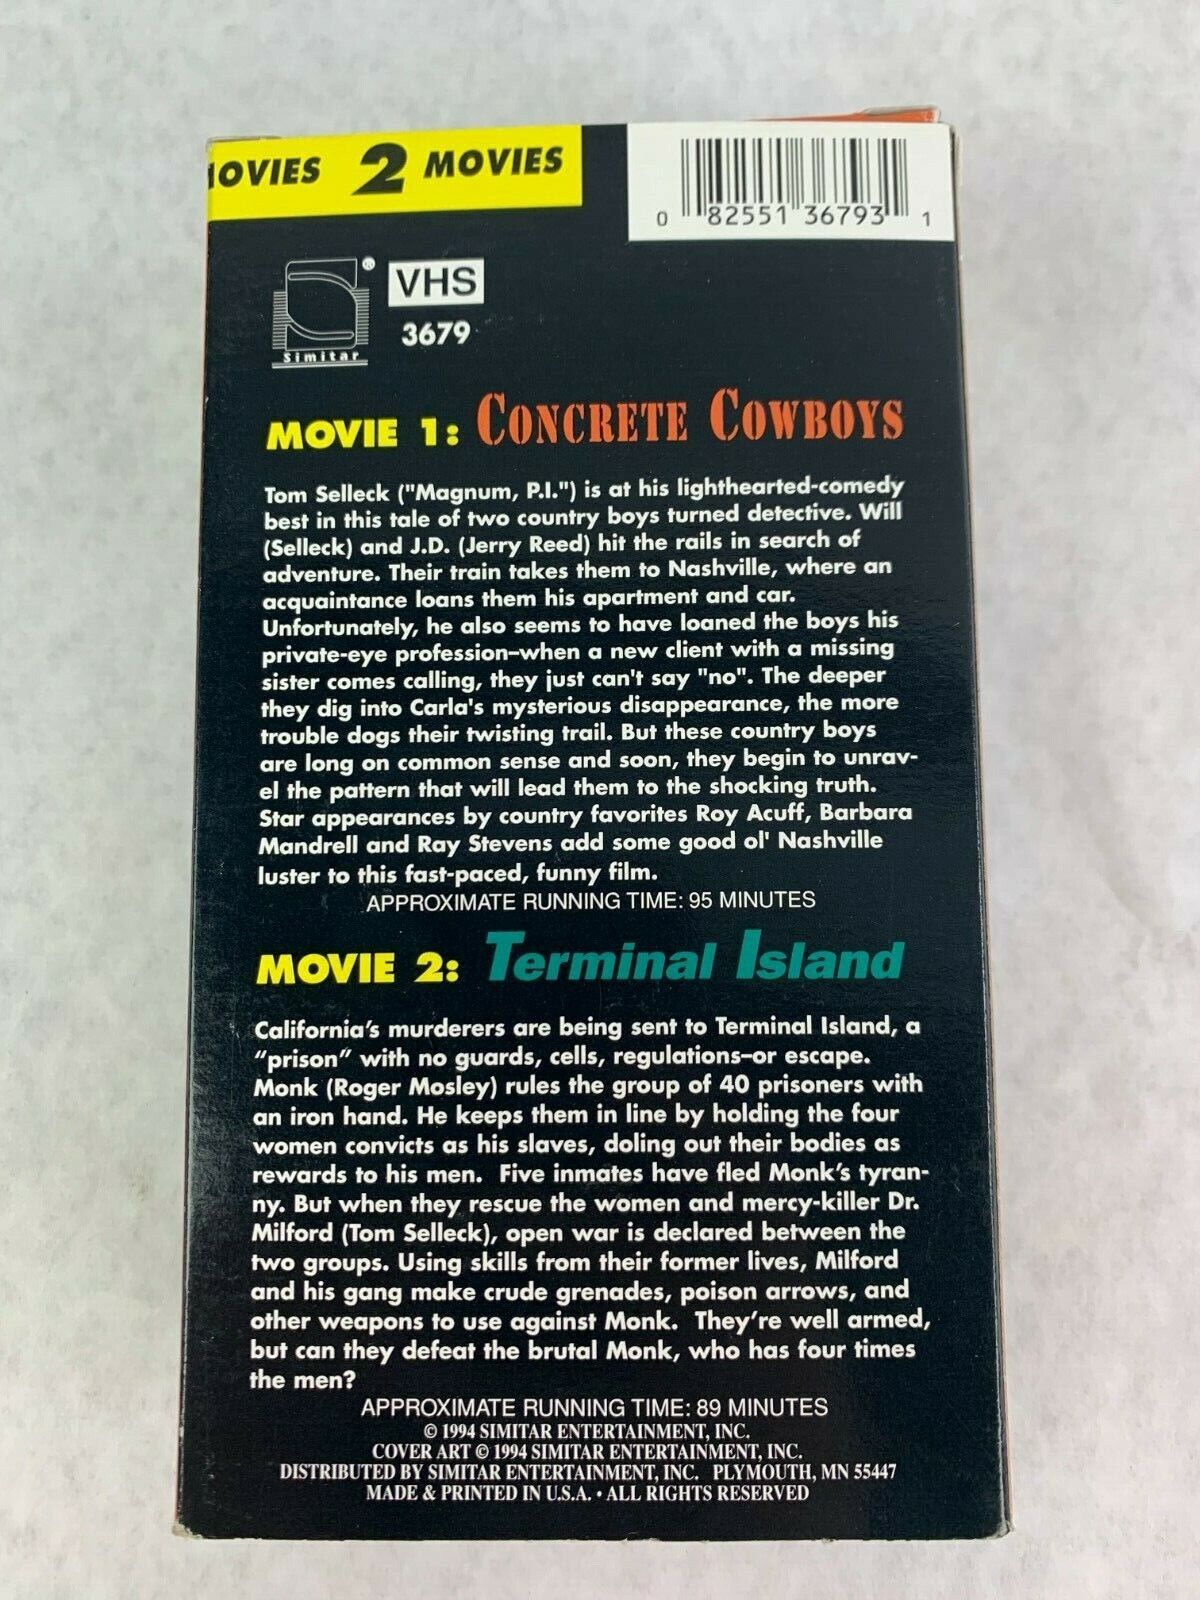 Vintage Classic The Concrete Cowboys and Terminal Island Tom Selleck 2 Movie Set